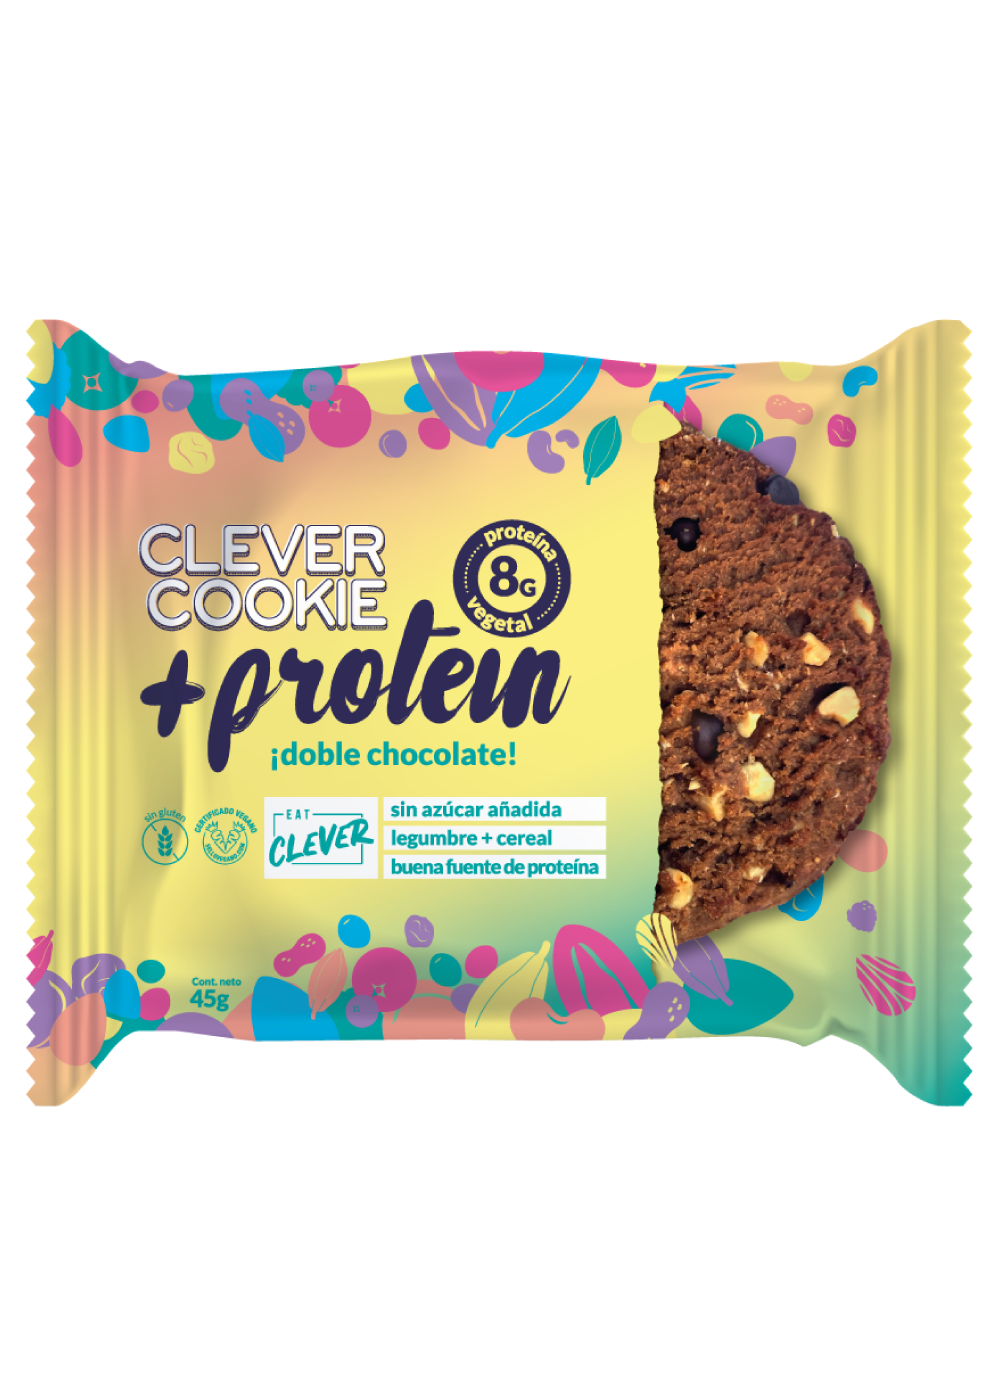 Galletón Clever Cookie +Protein Doble Chocolate Eat Clever 45g